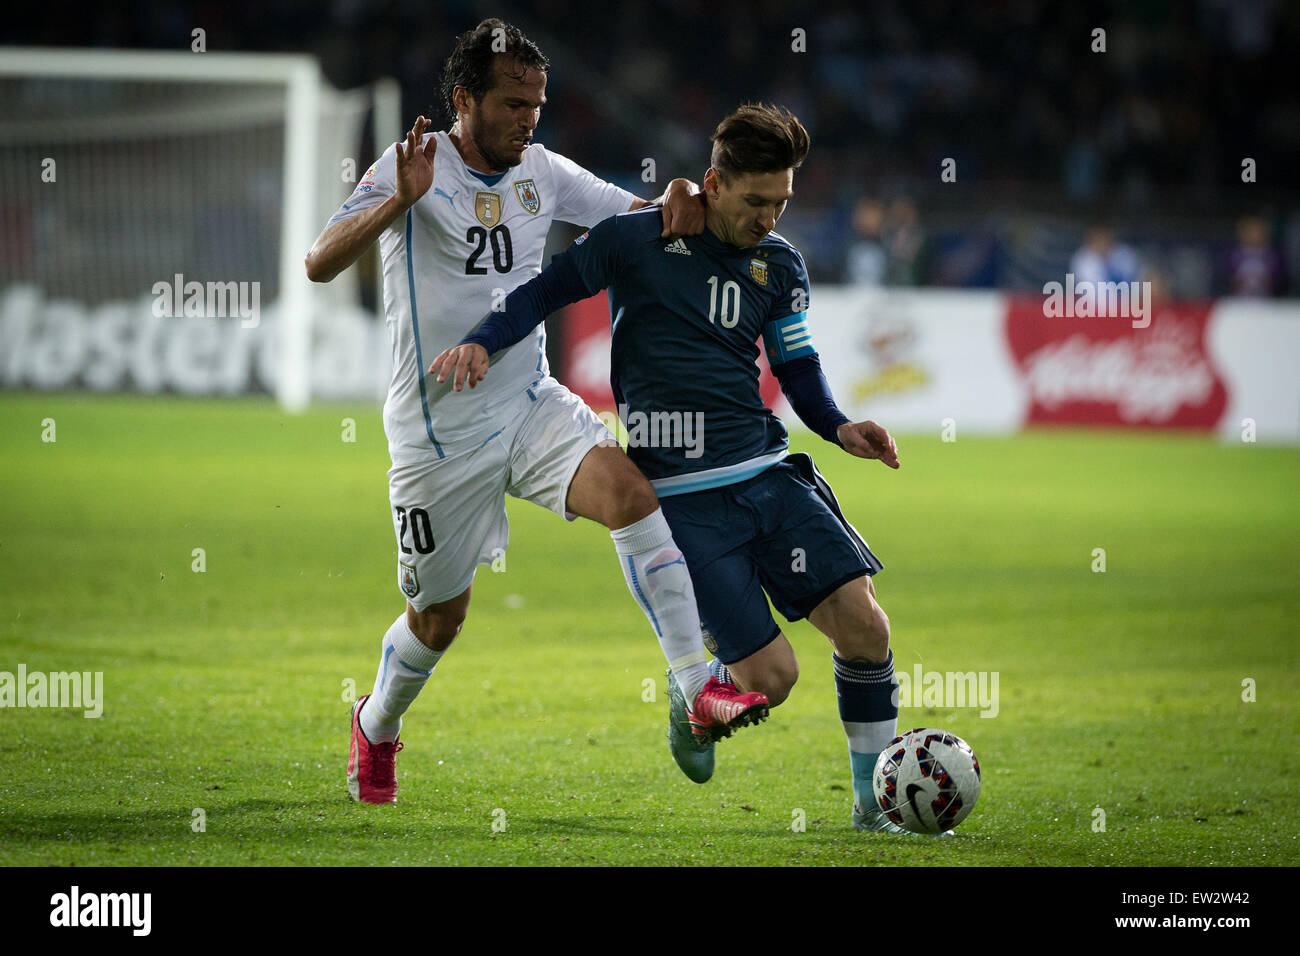 La Serena, Chile. 16th June, 2015. Lionel Messi (R) of Argentina vies for the ball with Alvaro Gonzalez of Uruguay during the Group B match at the 2015 American Cup, at La Portada stadium, in La Serena, Chile, on June 16, 2015. Argentina won 1-0. Credit:  Pedro Mera/Xinhua/Alamy Live News Stock Photo